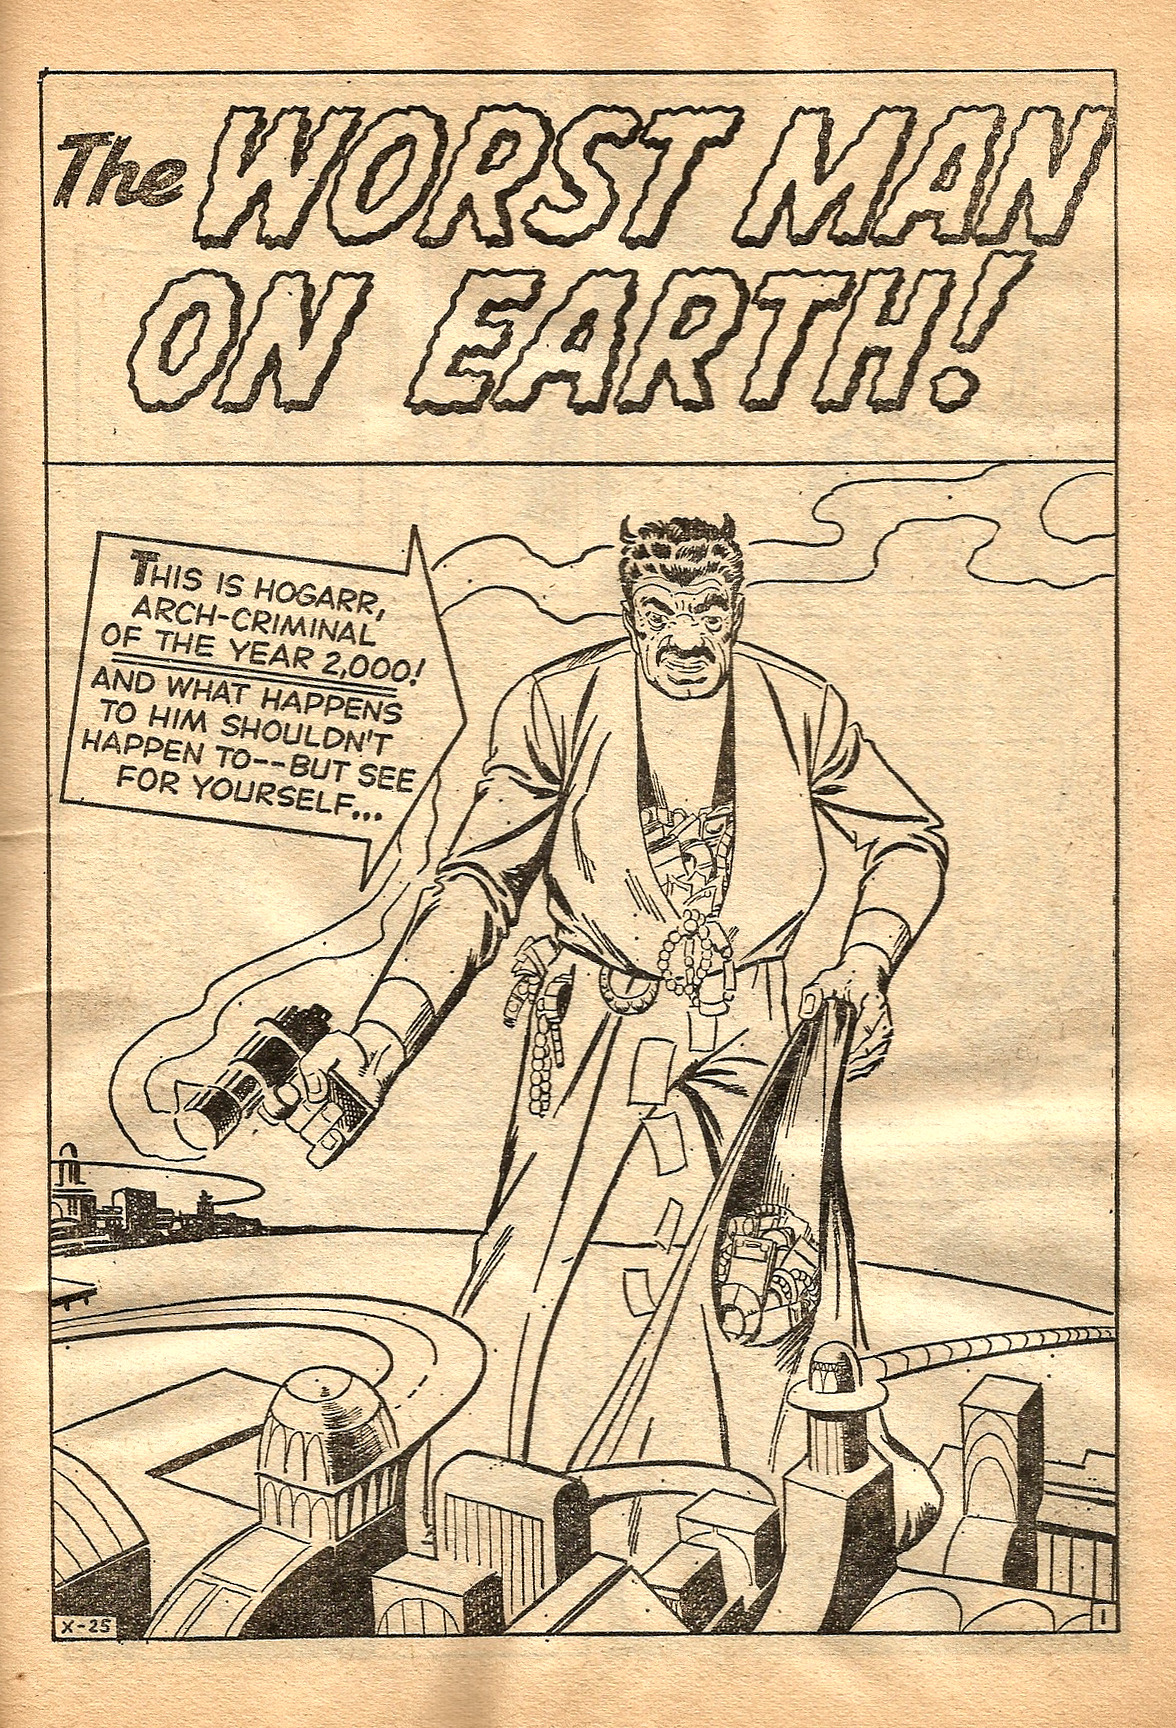 Splash page from The Worst Man On Earth by Stan Lee and Steve Ditko, from Uncanny